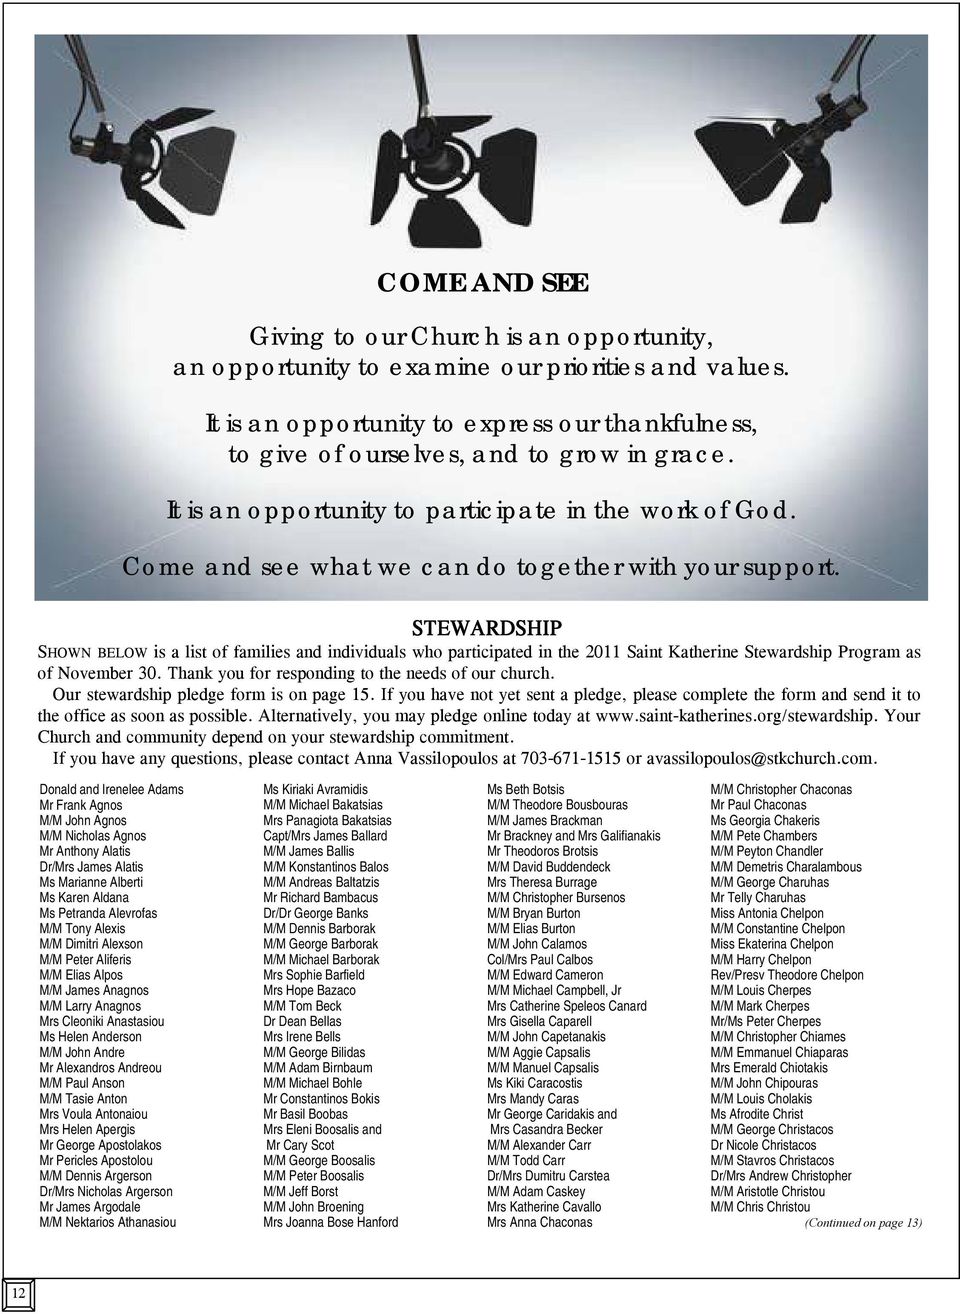 STEWARDSHIP SHOWN BELOW is a list of families and individuals who participated in the 2011 Saint Katherine Stewardship Program as of November 30. Thank you for responding to the needs of our church.